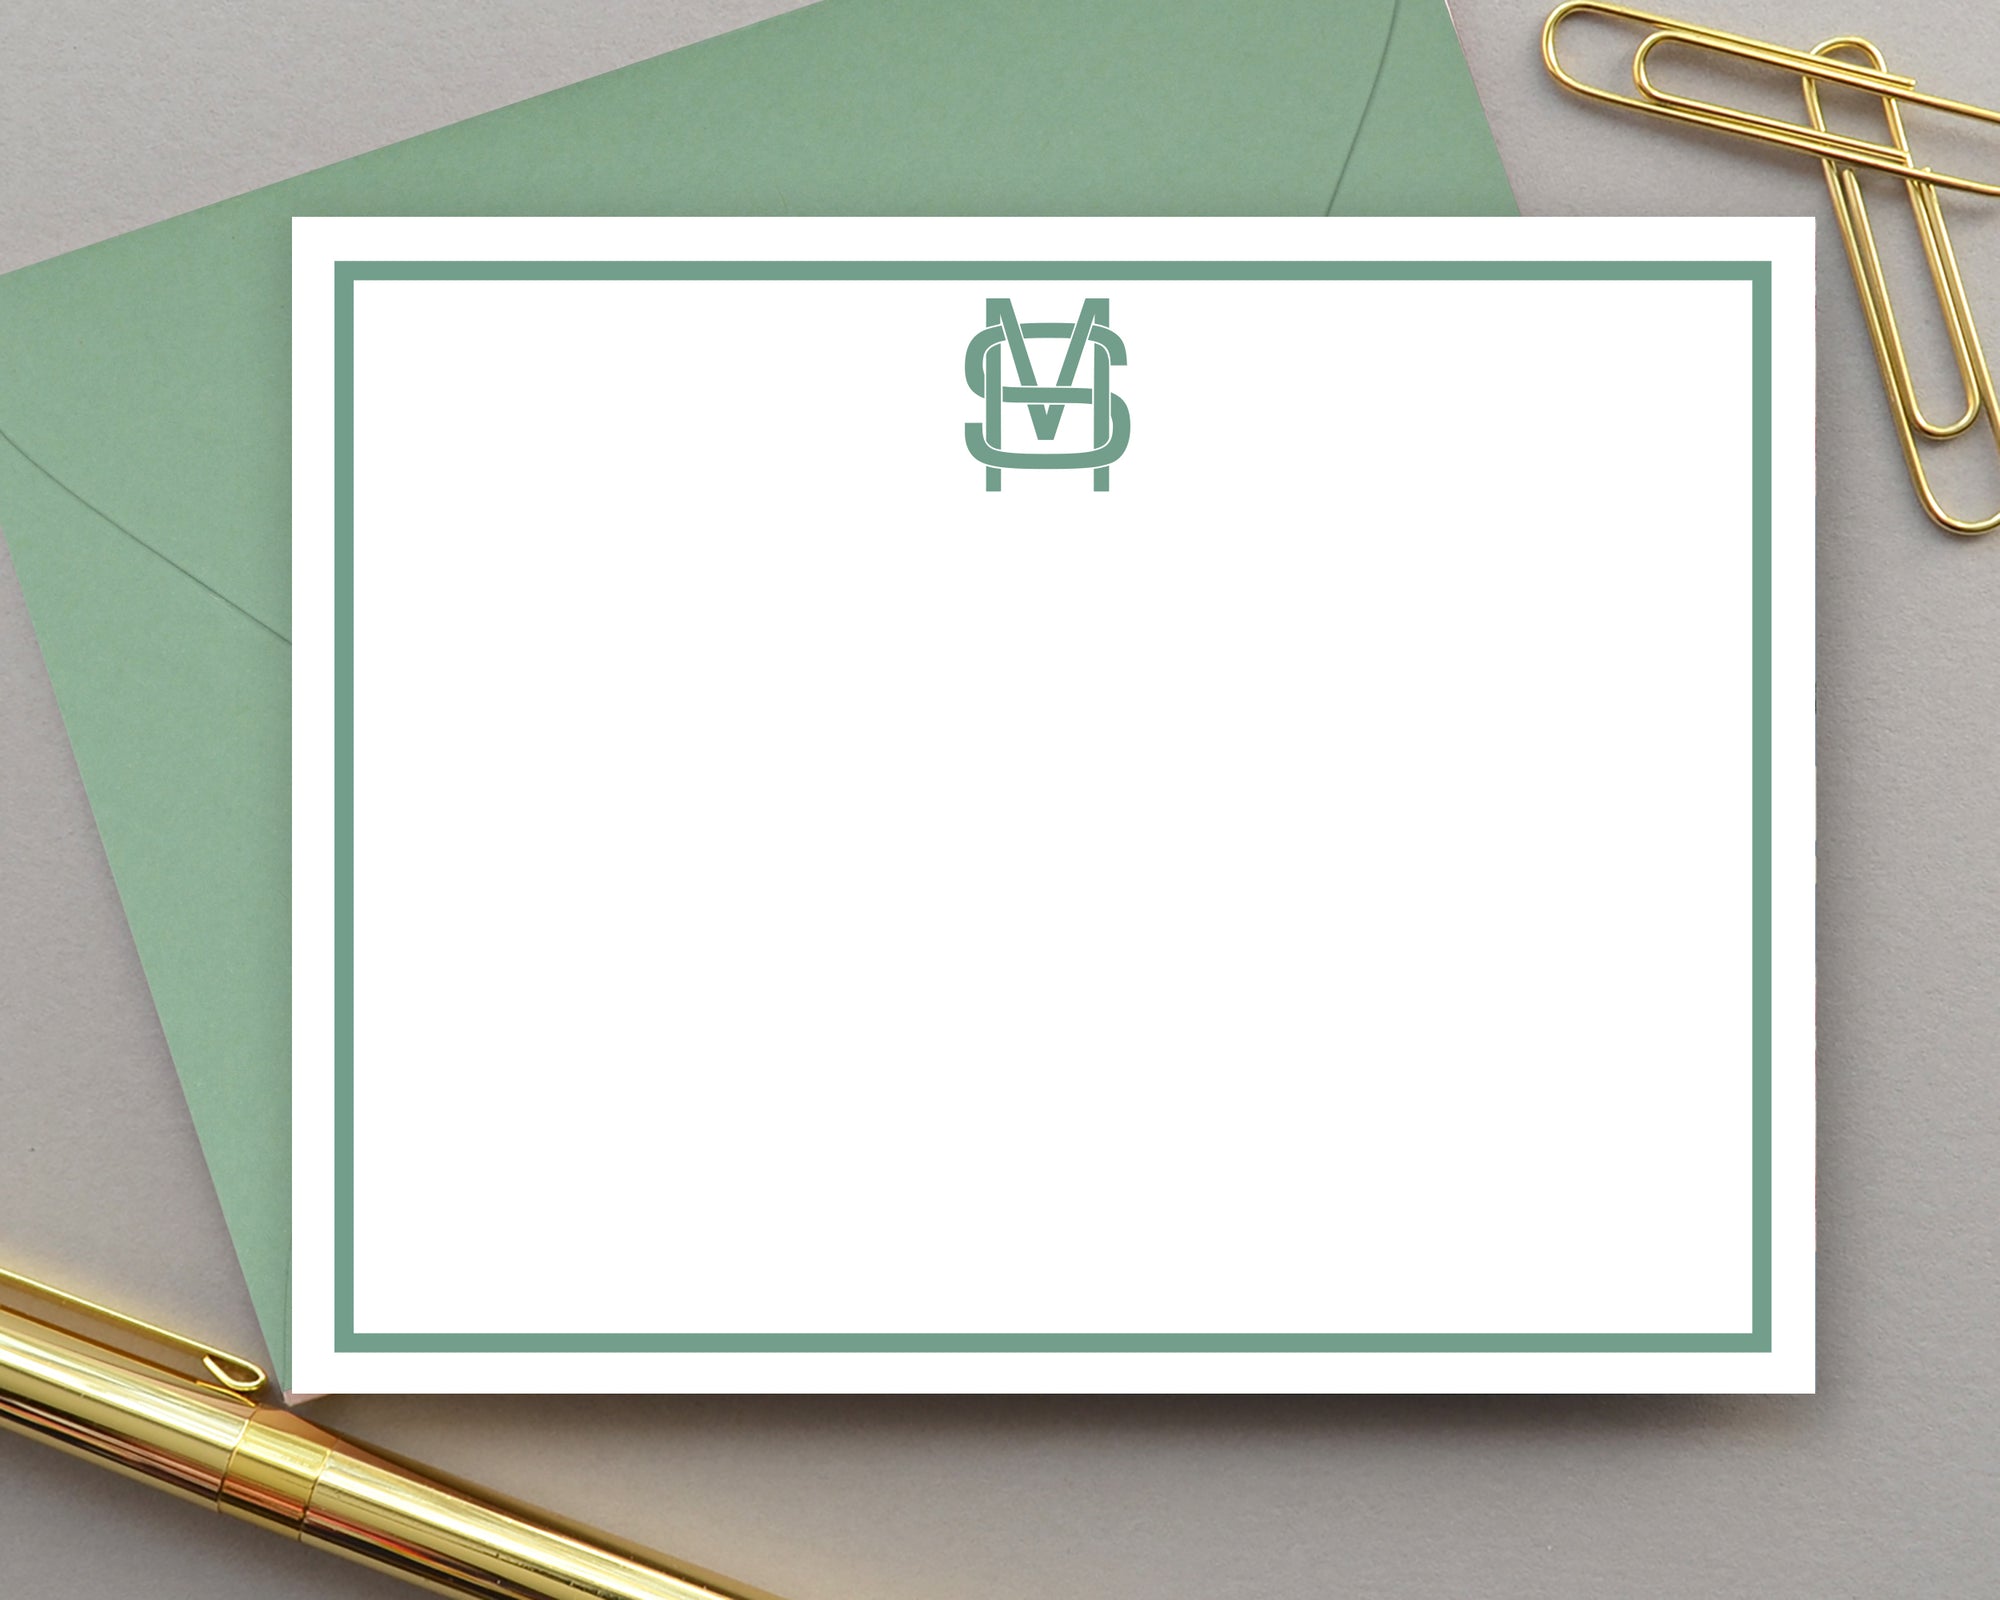  Personalized Note Card Stationery with Envelopes for Men with  Border, Monogram and Full Name, Mens Stationary Set of Flat Notecards in  Choice of Colors : Handmade Products